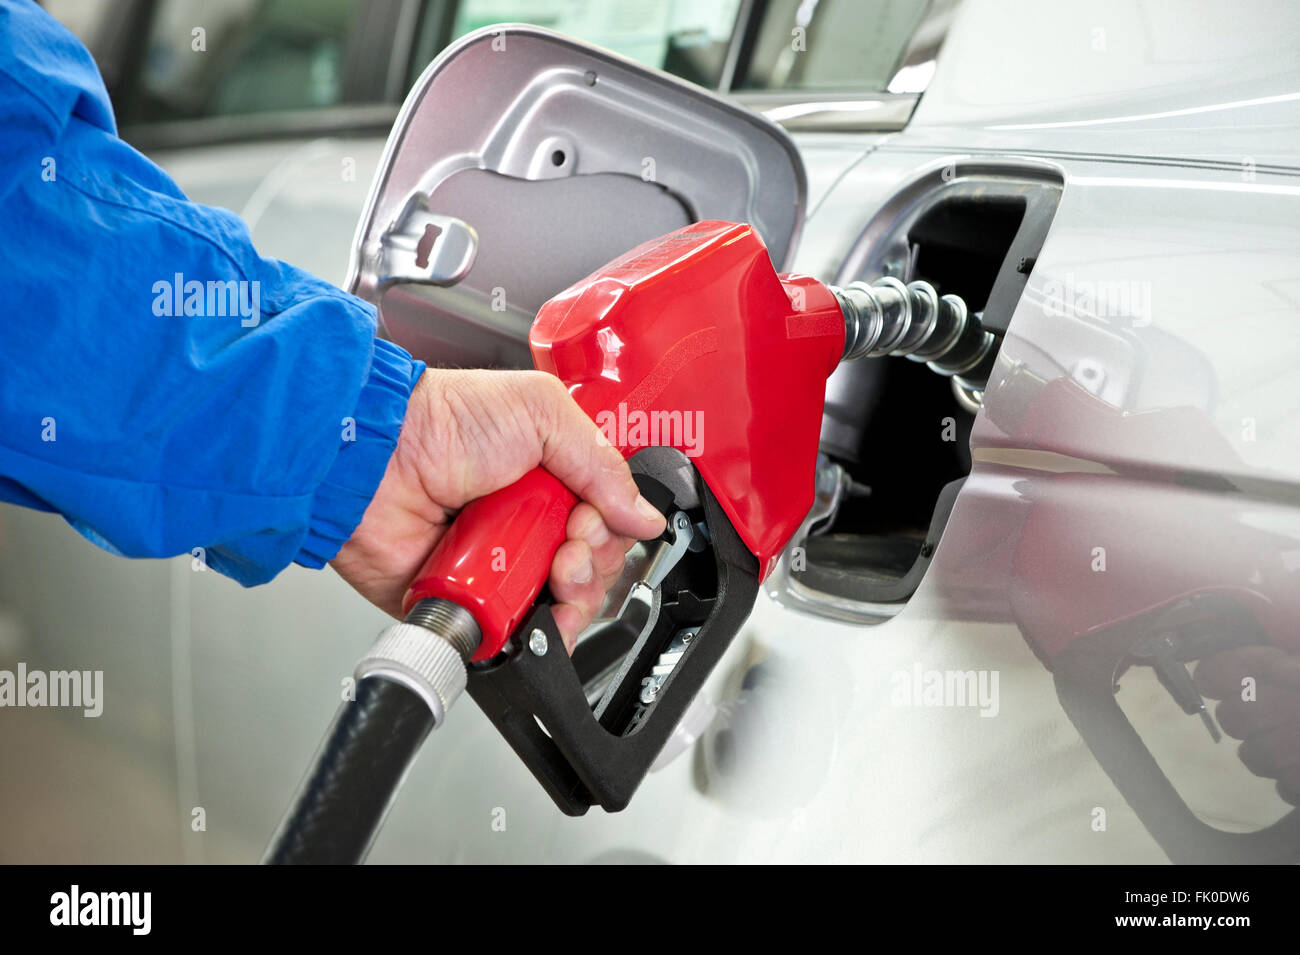 Hand Pumping Gasoline From Red Fuel Pump Nozzle Stock Photo